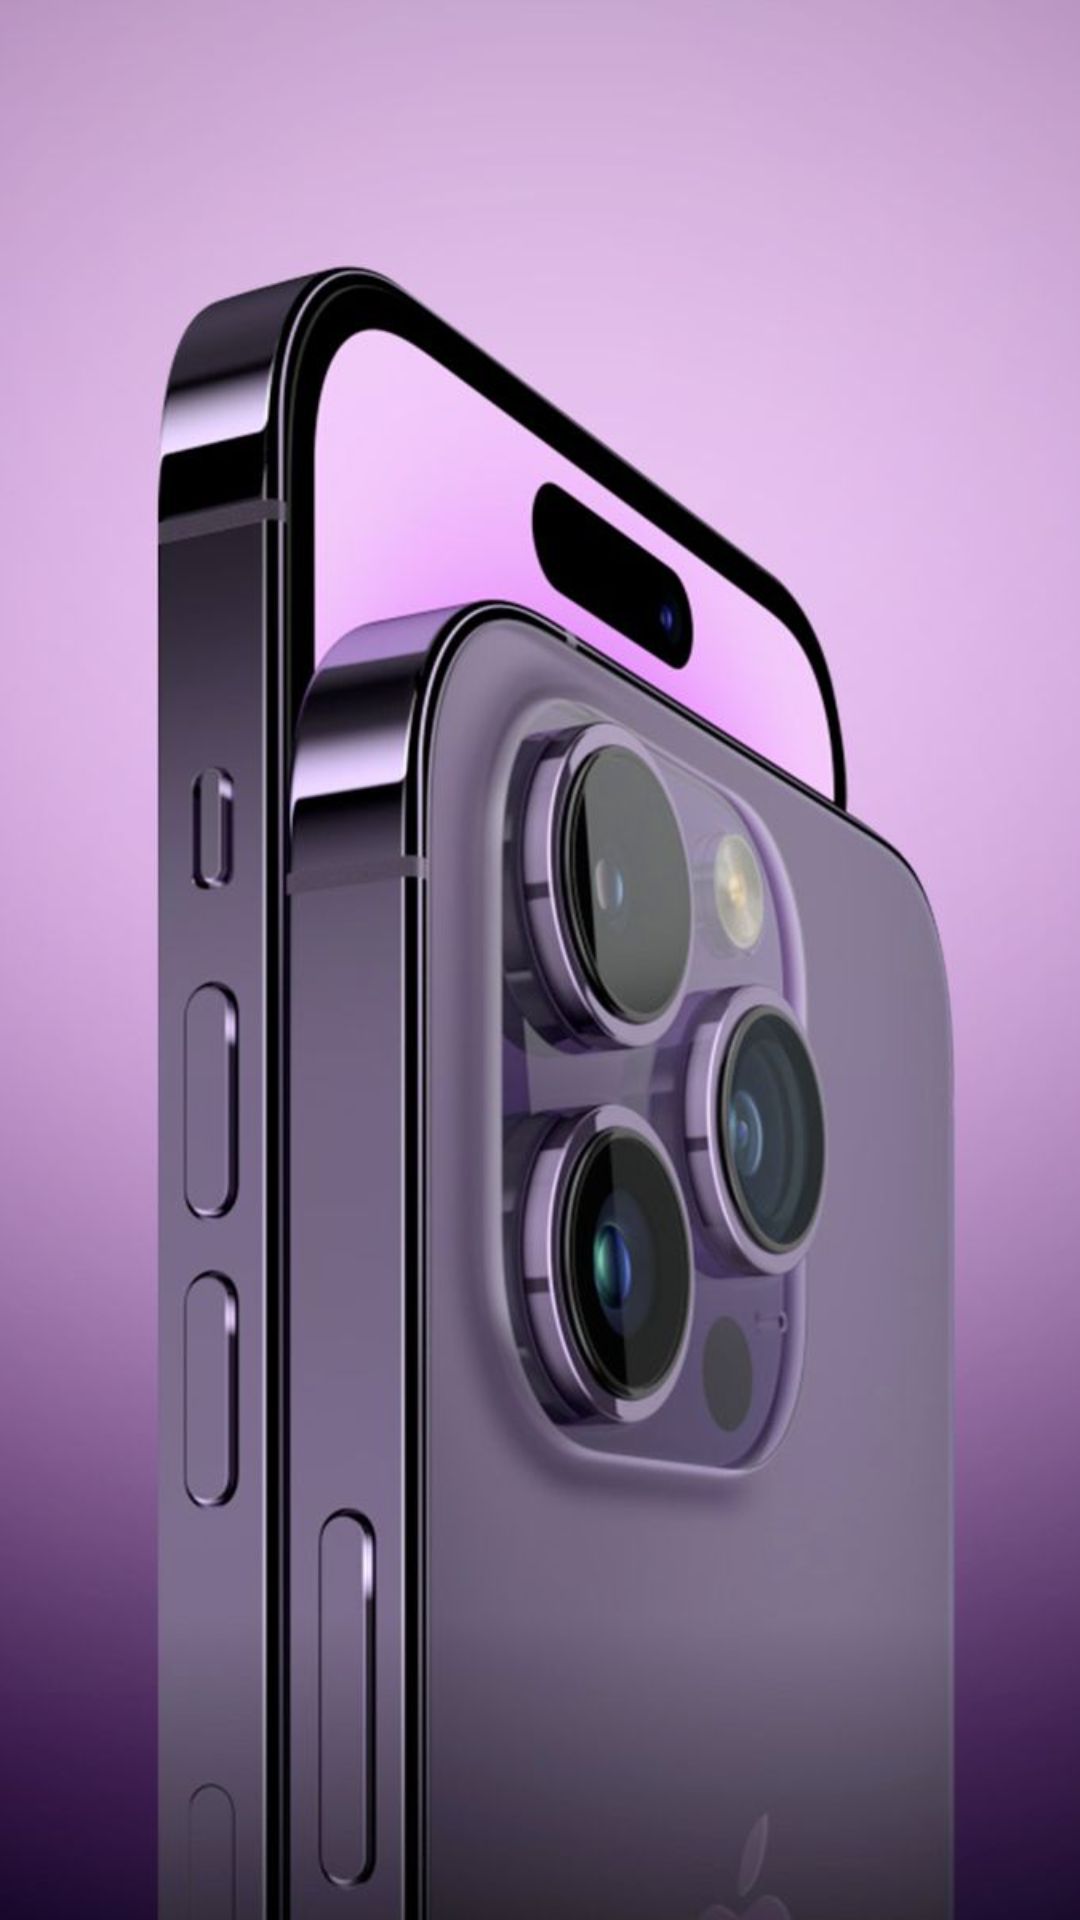 iPhone 15 and iPhone 15 Plus will have a 48-megapixel rear camera lens